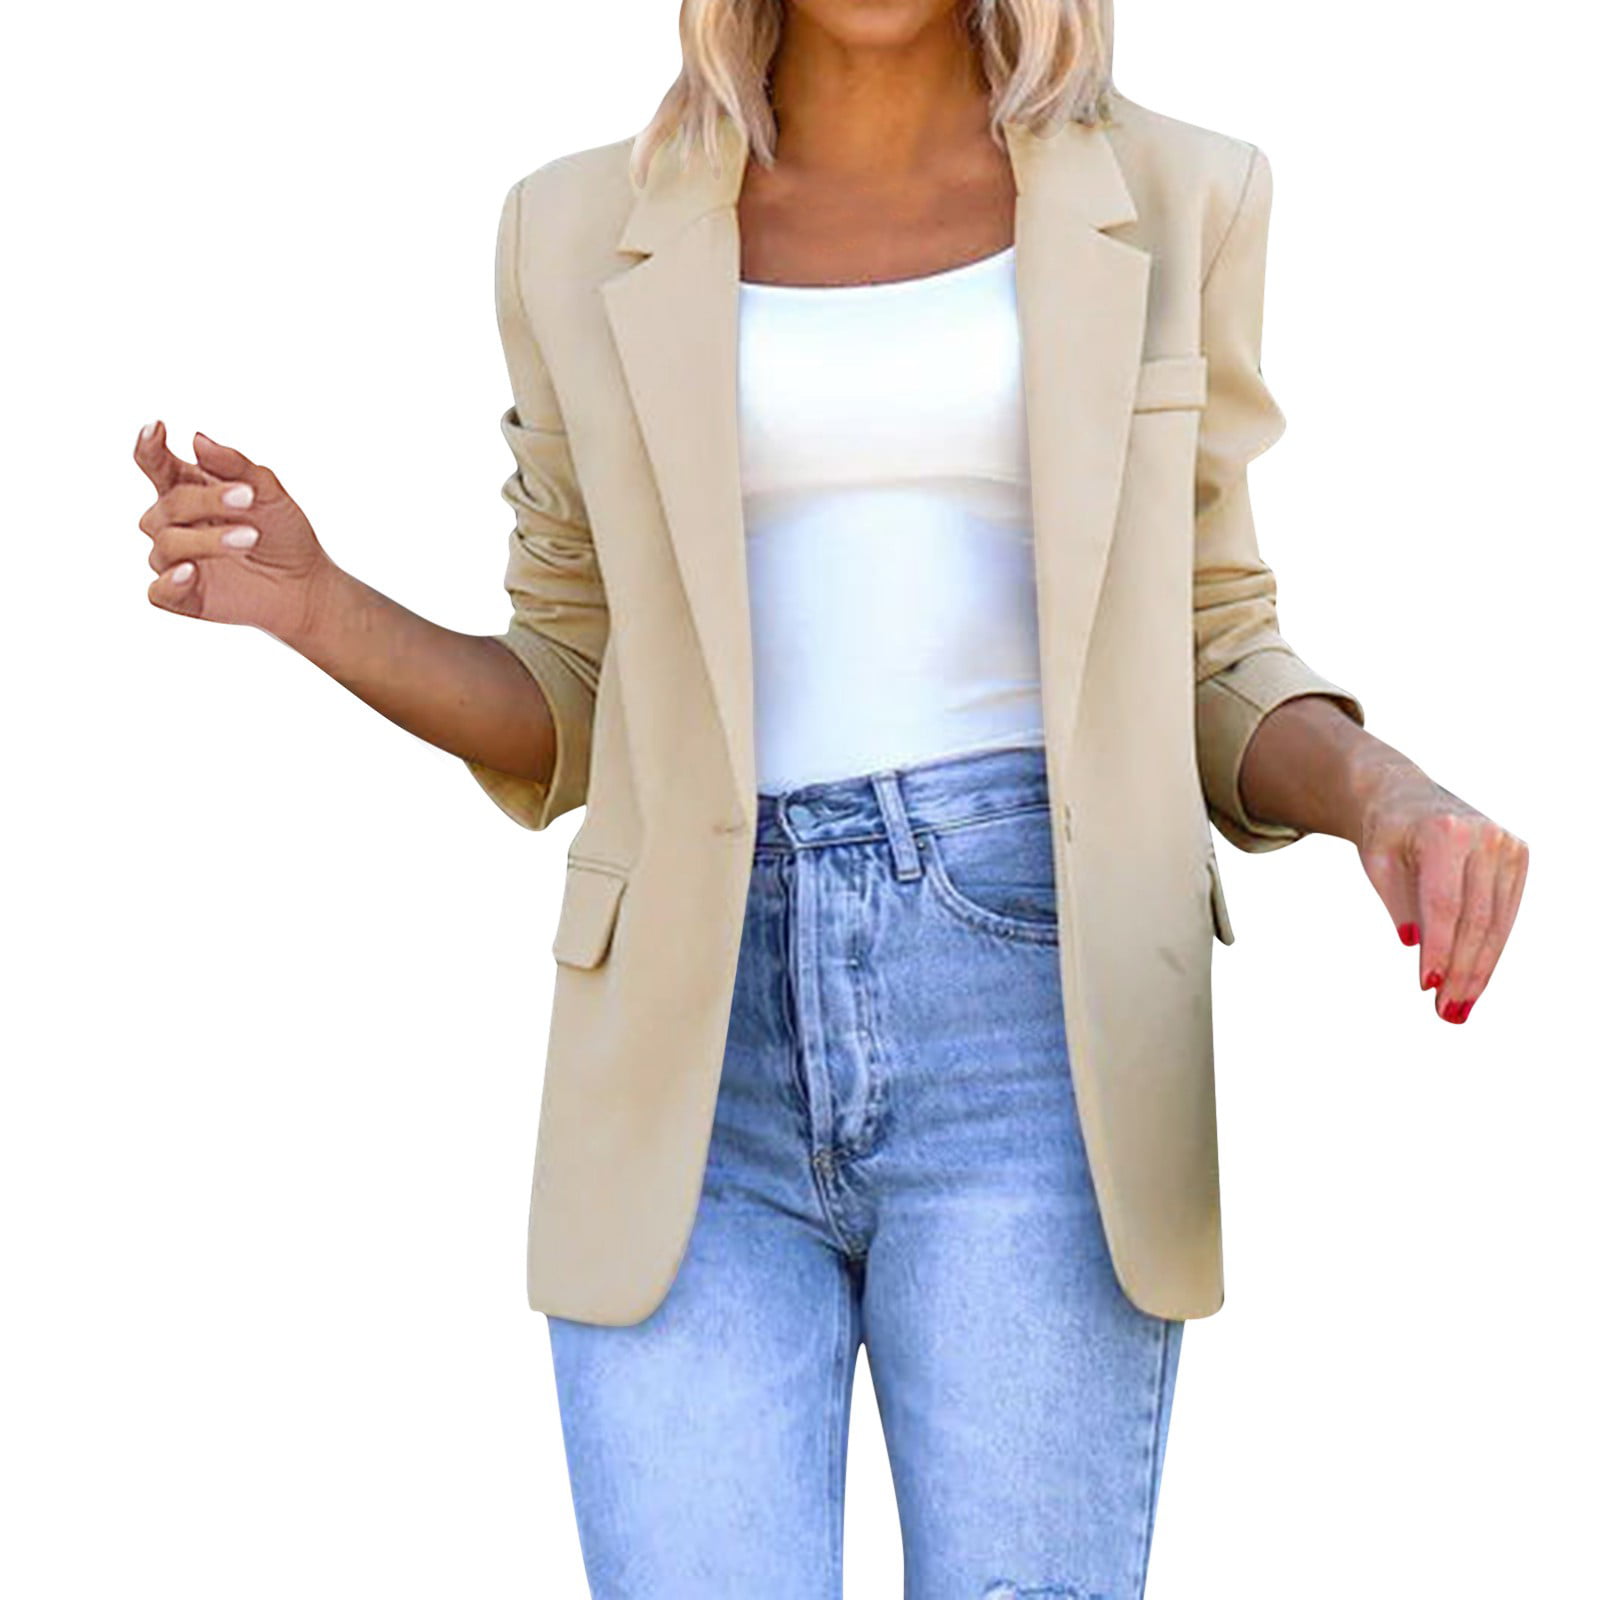 Fall Business Casual Outfit with Statement Jacket